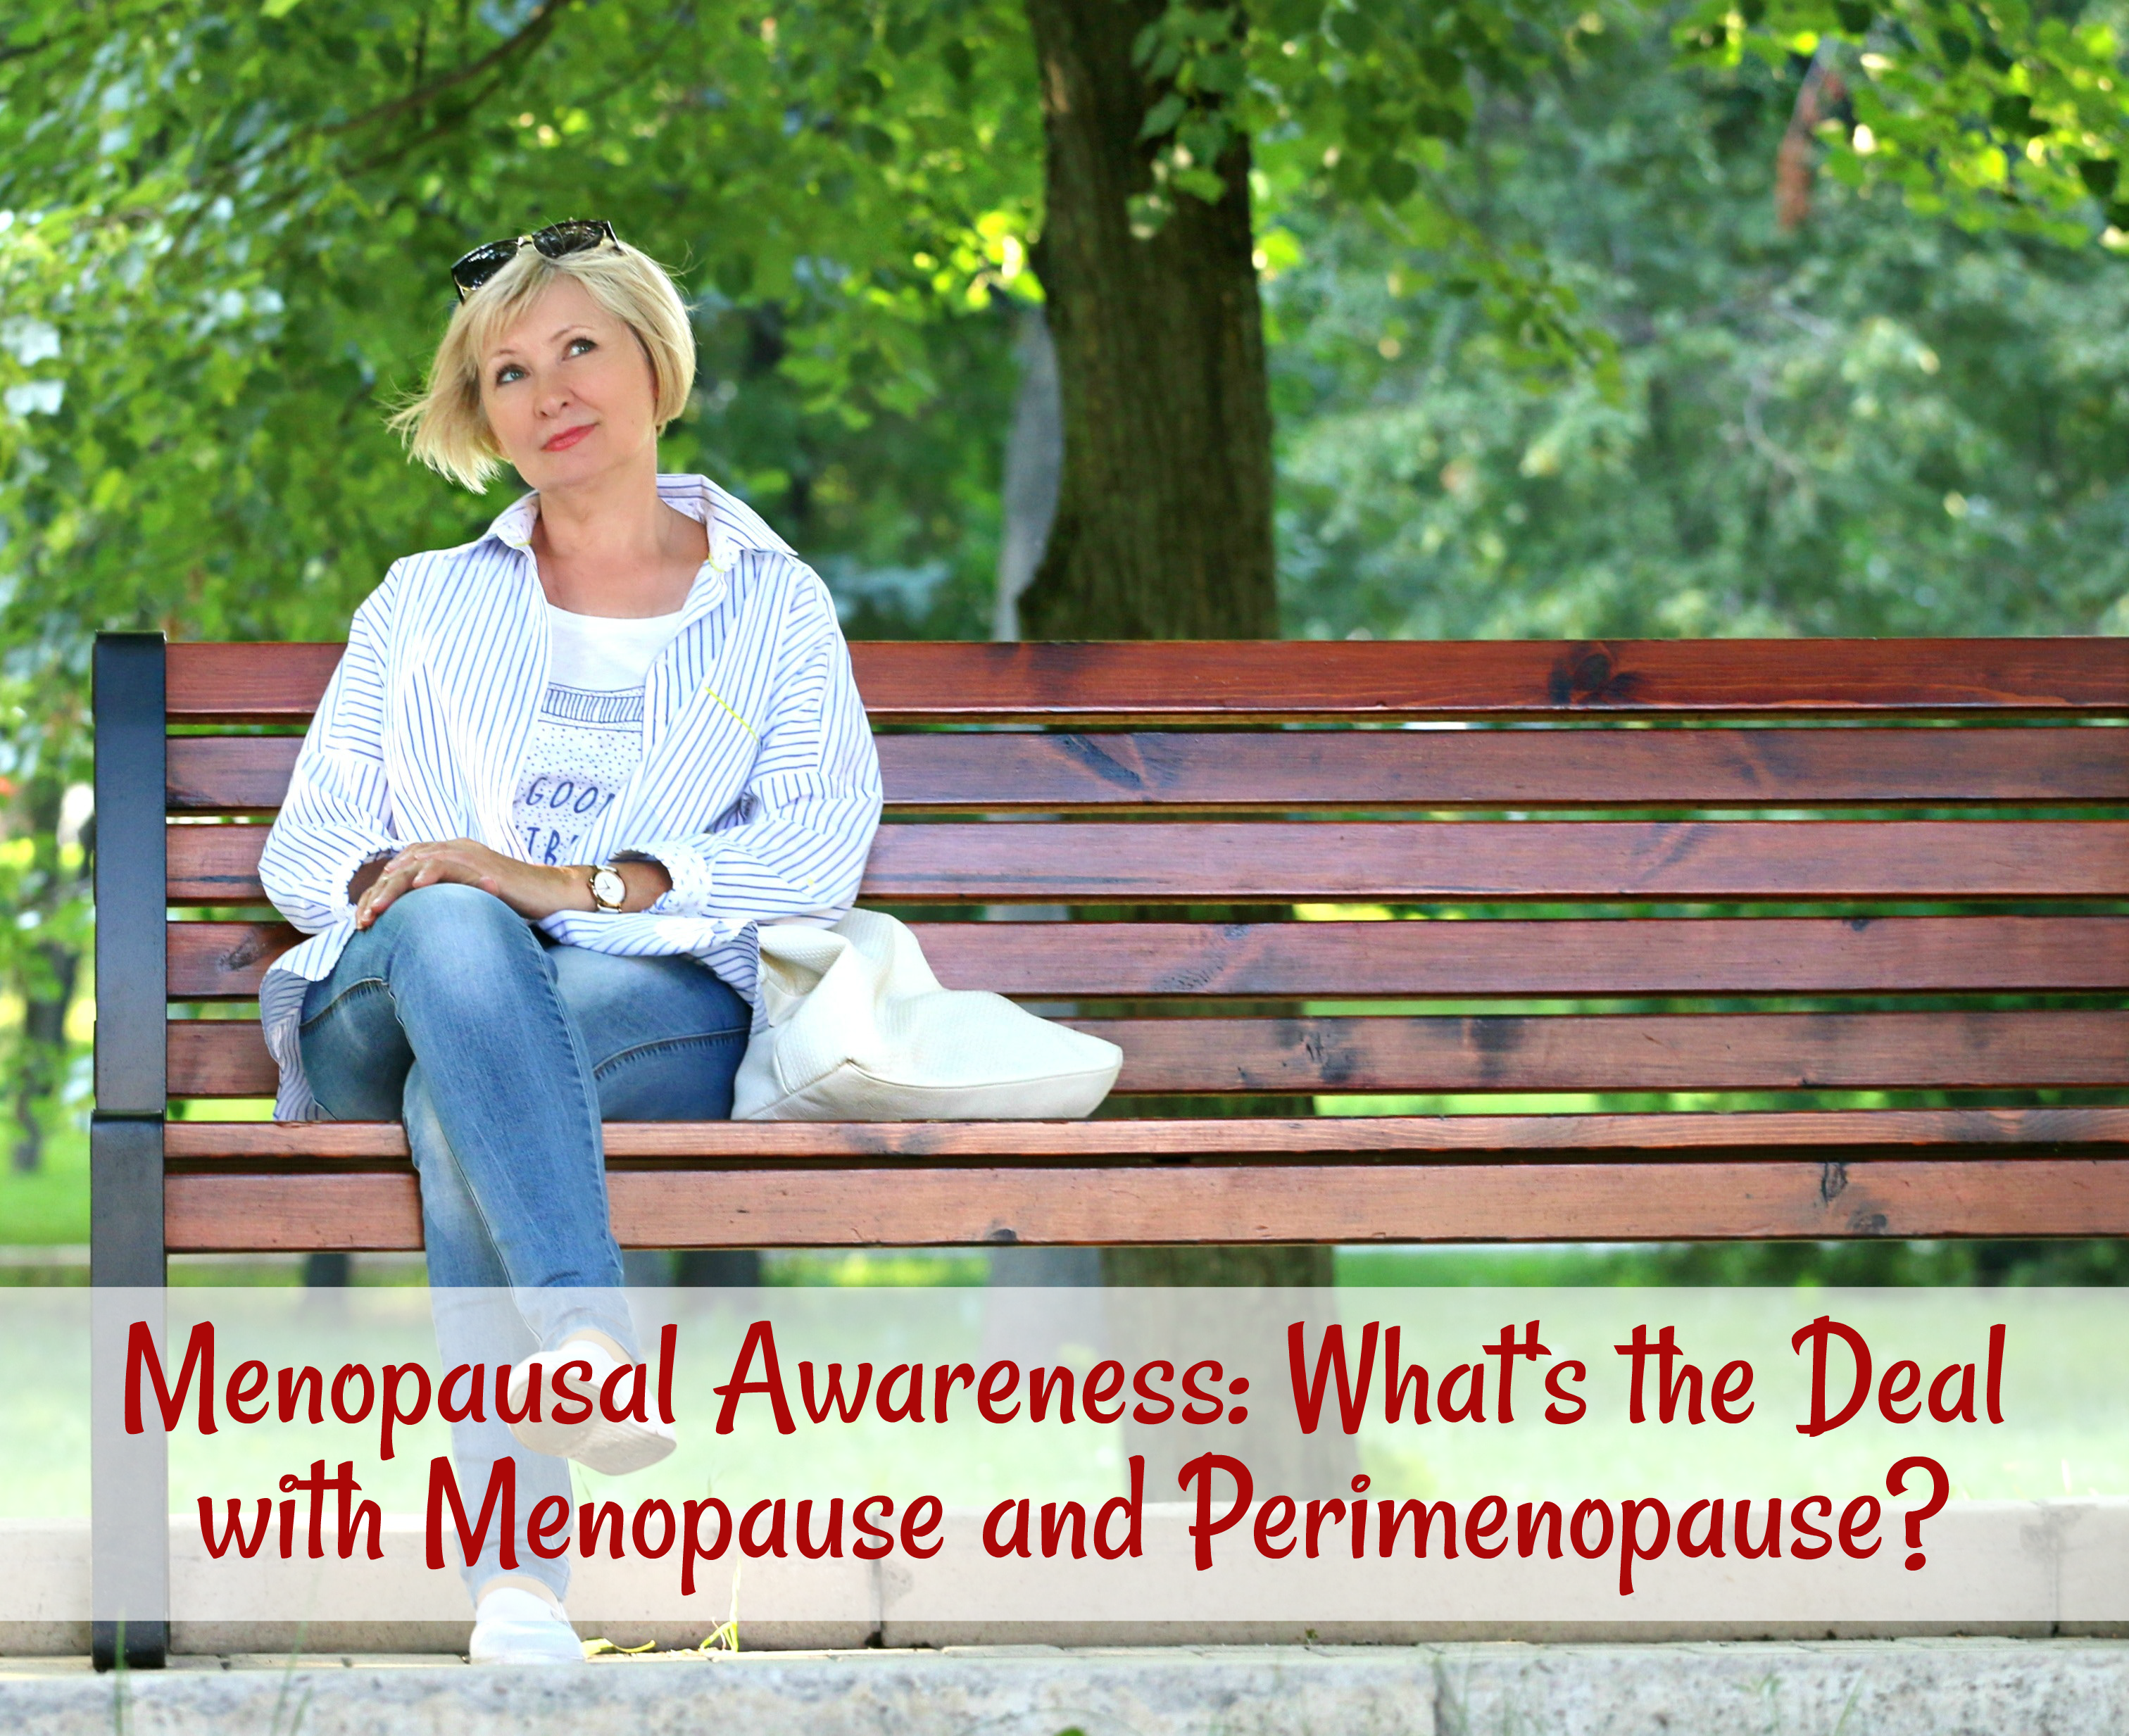 Menopausal Awareness: What’s the Deal with Menopause and Perimenopause?